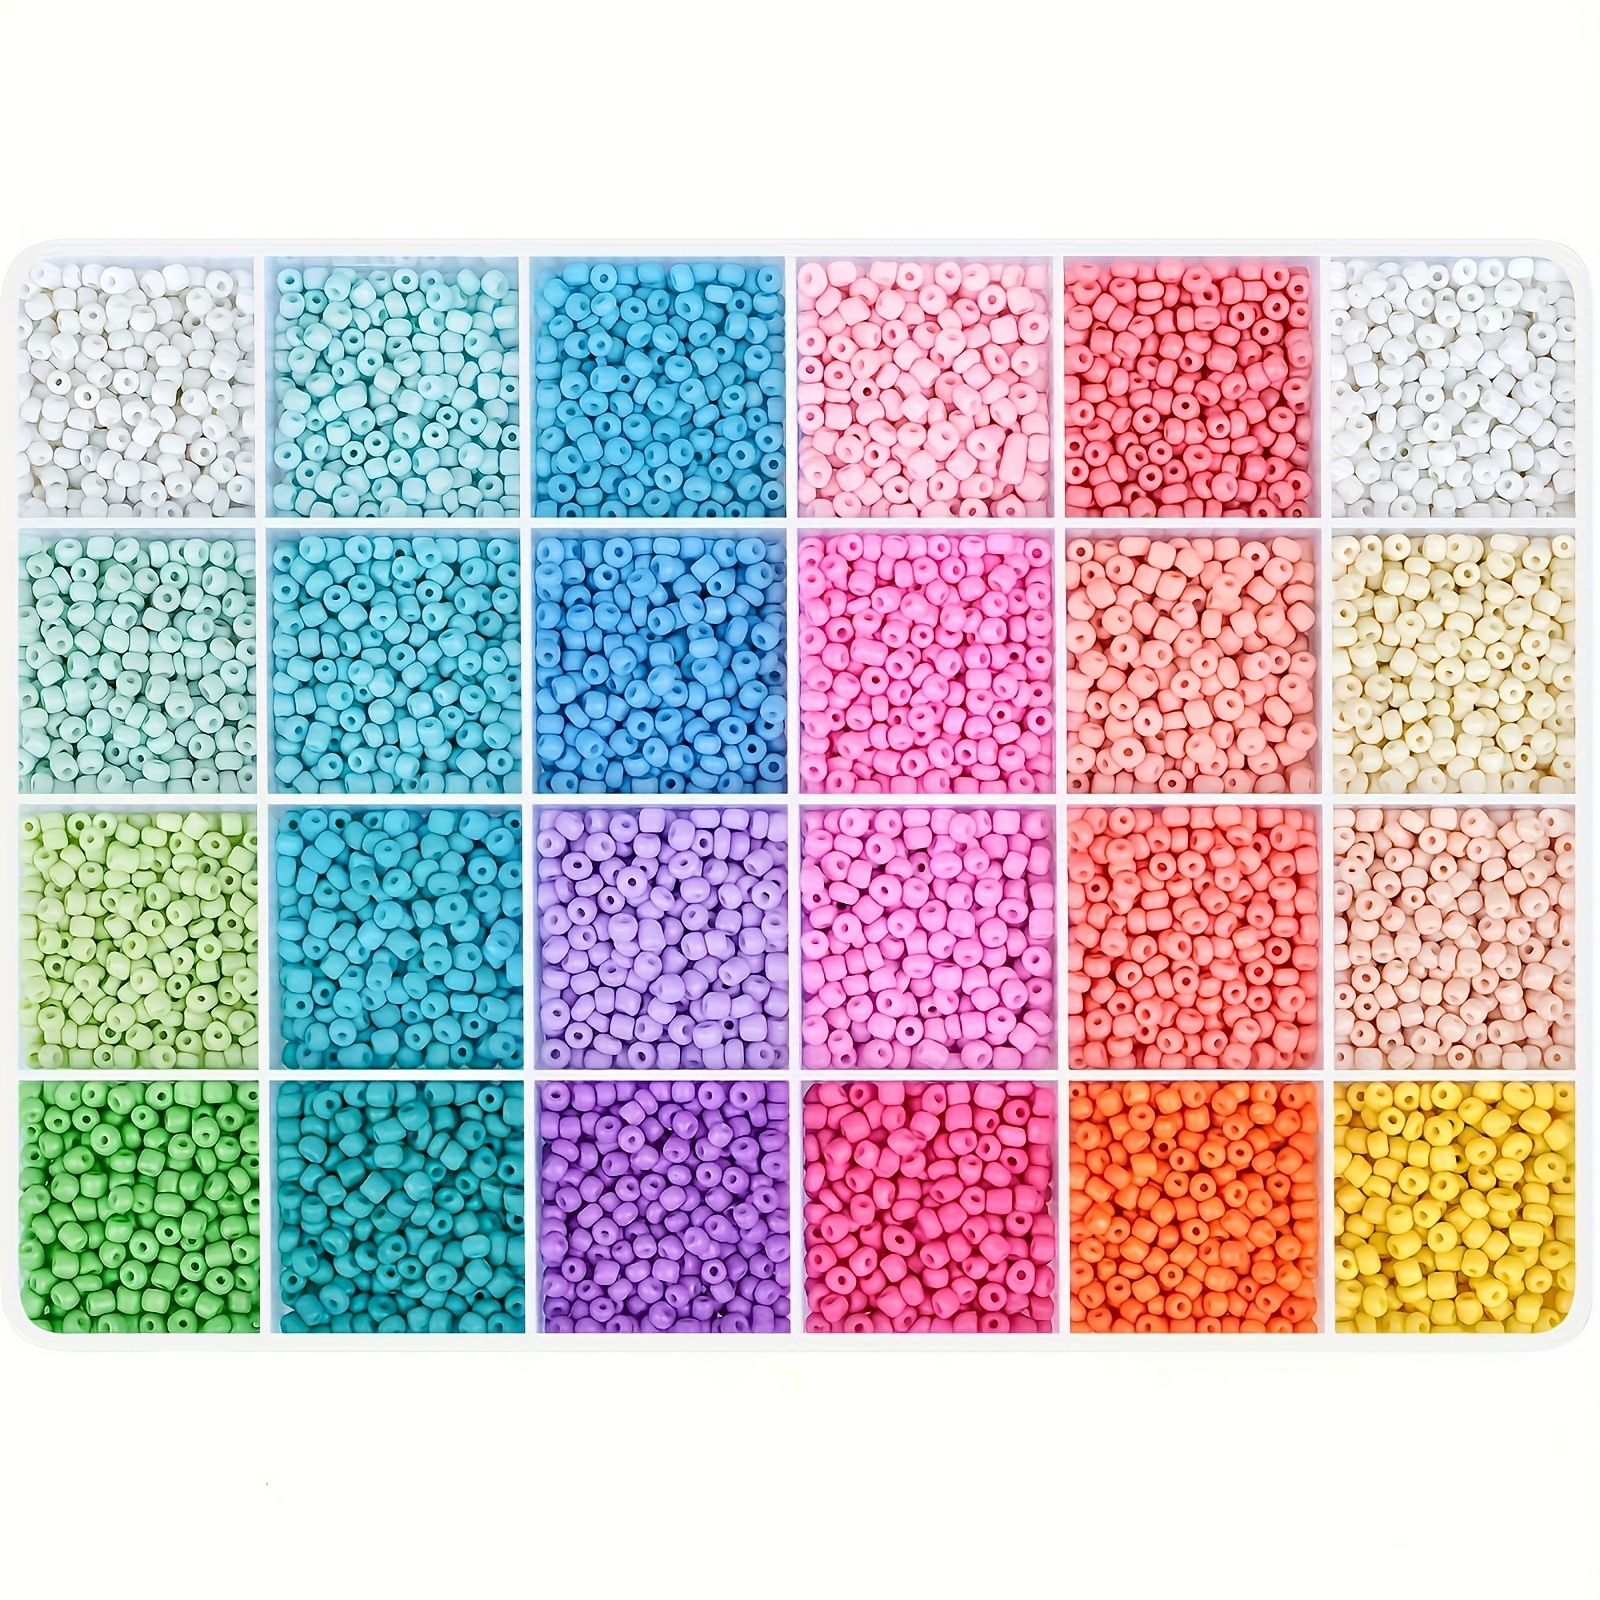 

19000pcs 2mm 24 Colors Macaroon Glass Seed Beads With Storage Set Box For Jewelry Making Diy Fashion Friendship Bracelet Necklace Earrings Pet Clothing Beaded Decors Accessories